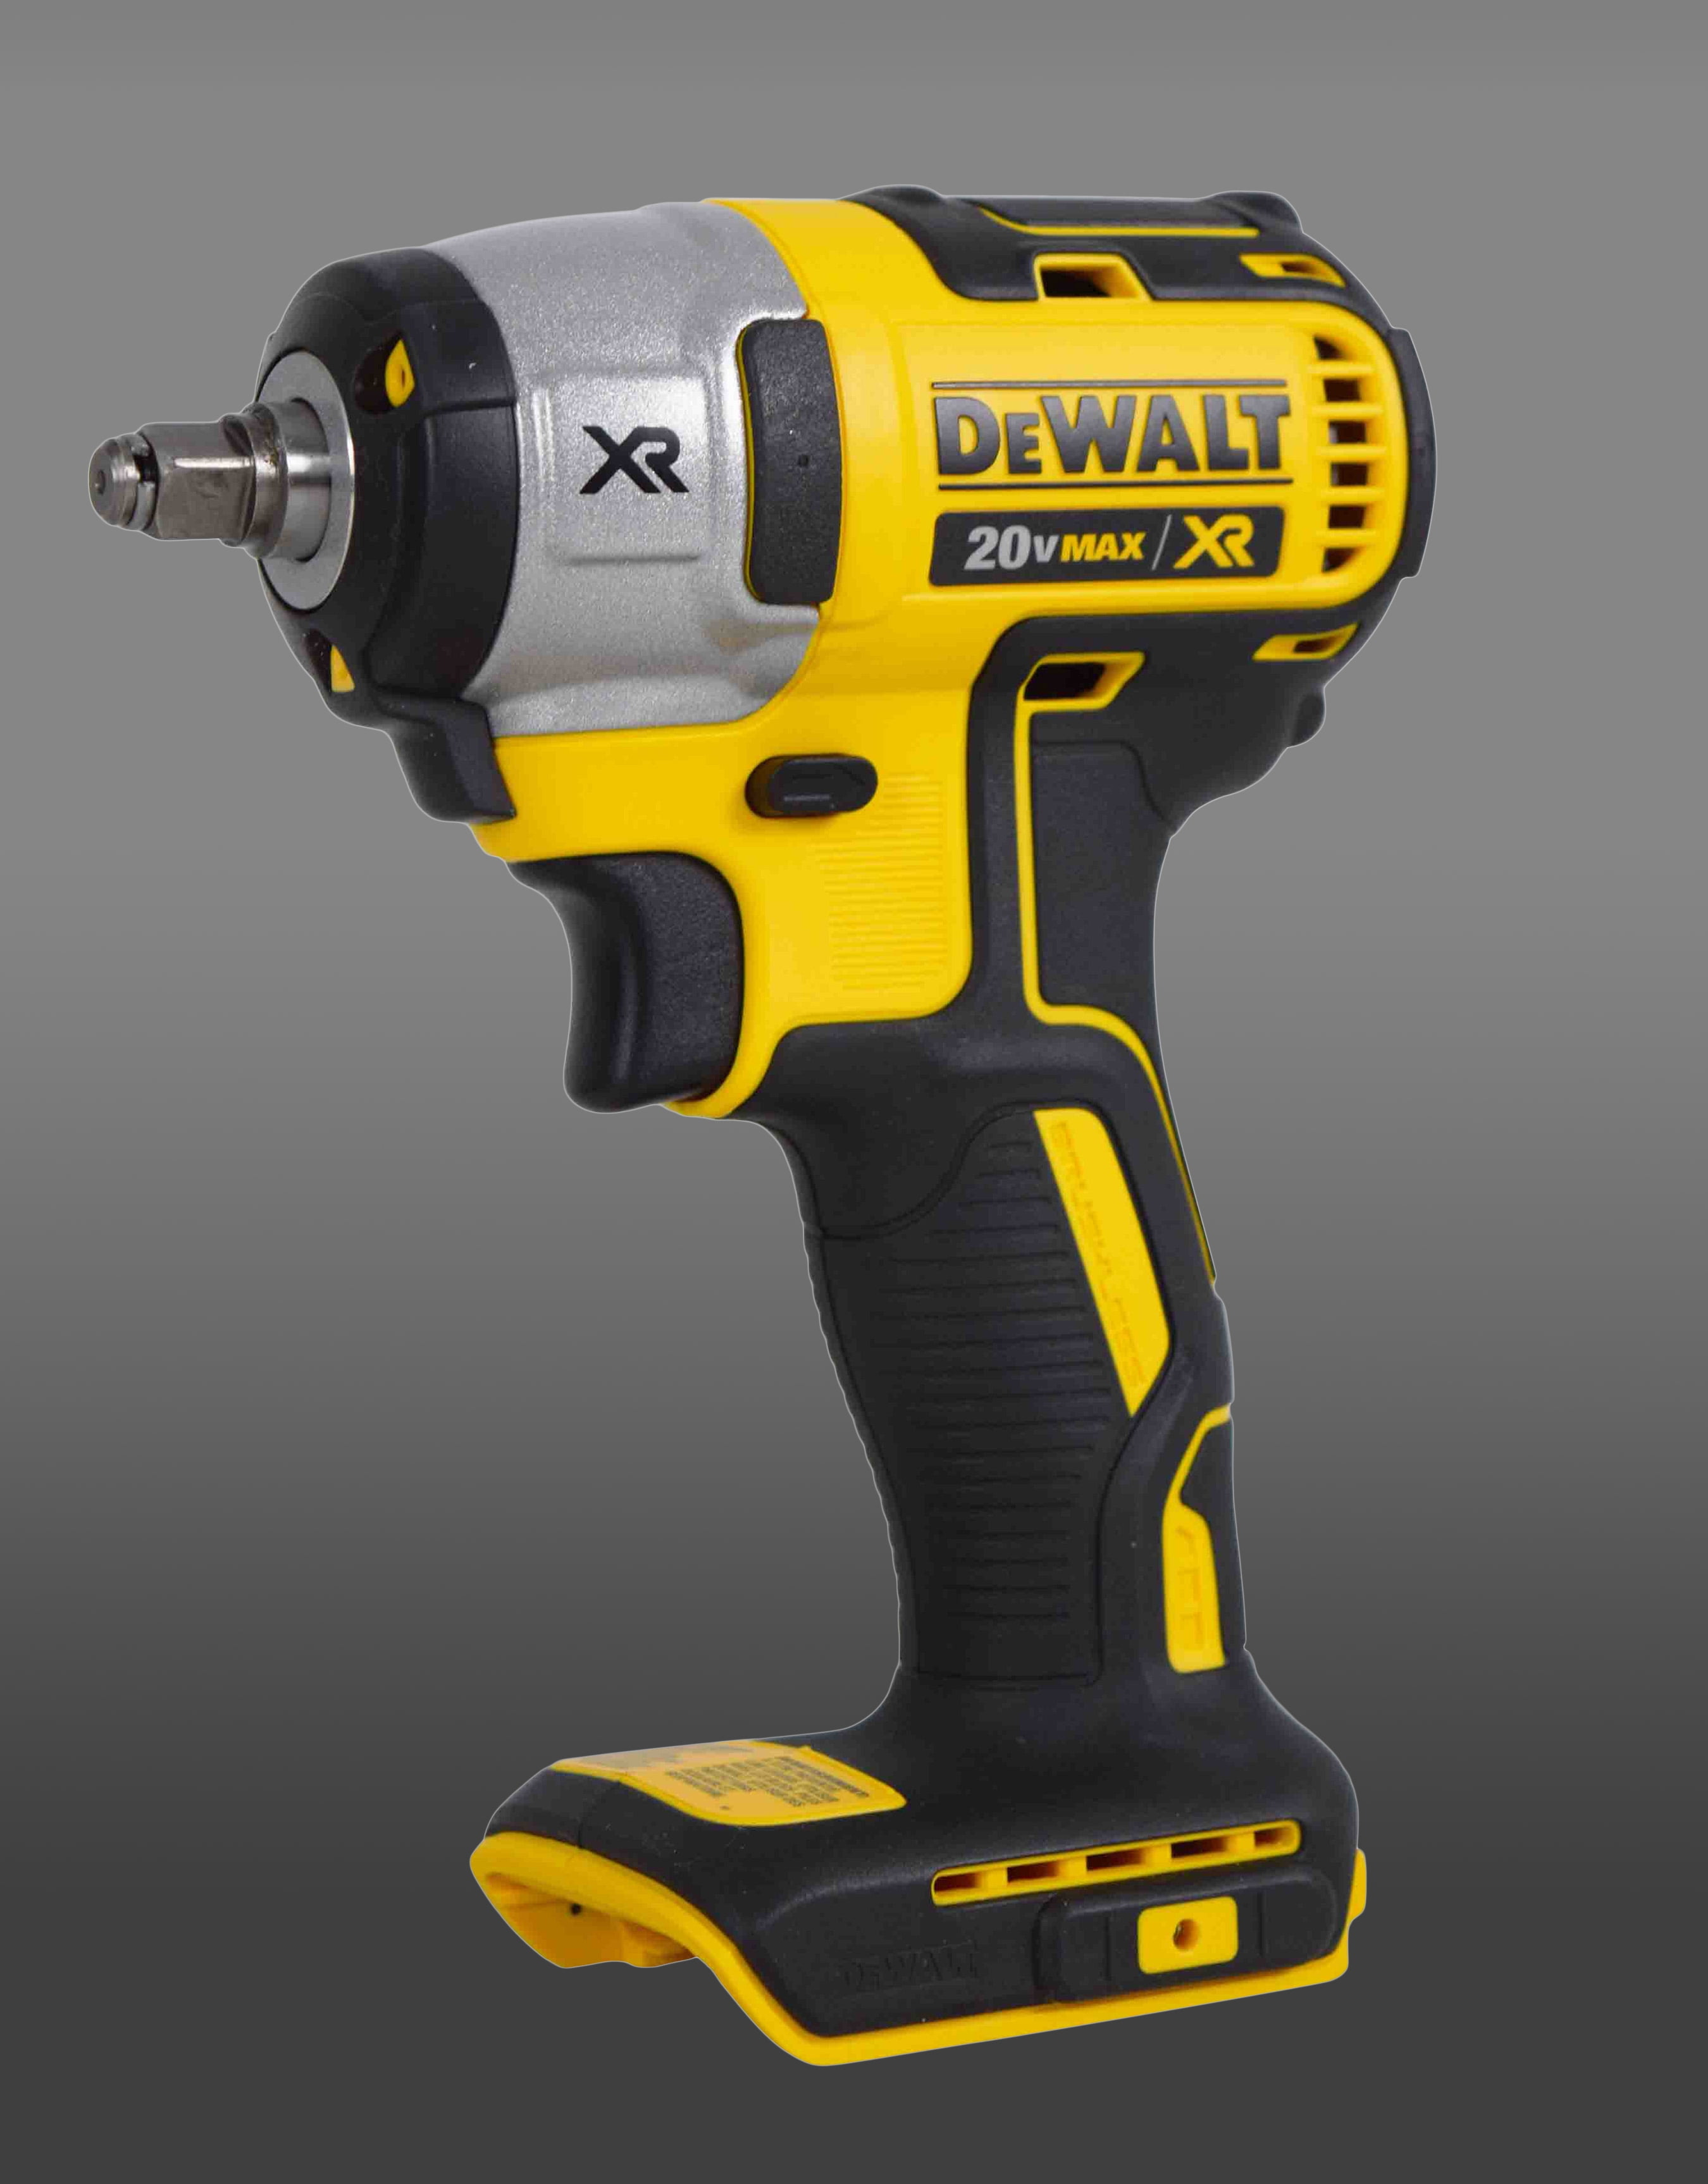 DEWALT DCF880 20V Impact Wrench Yellow for sale online 